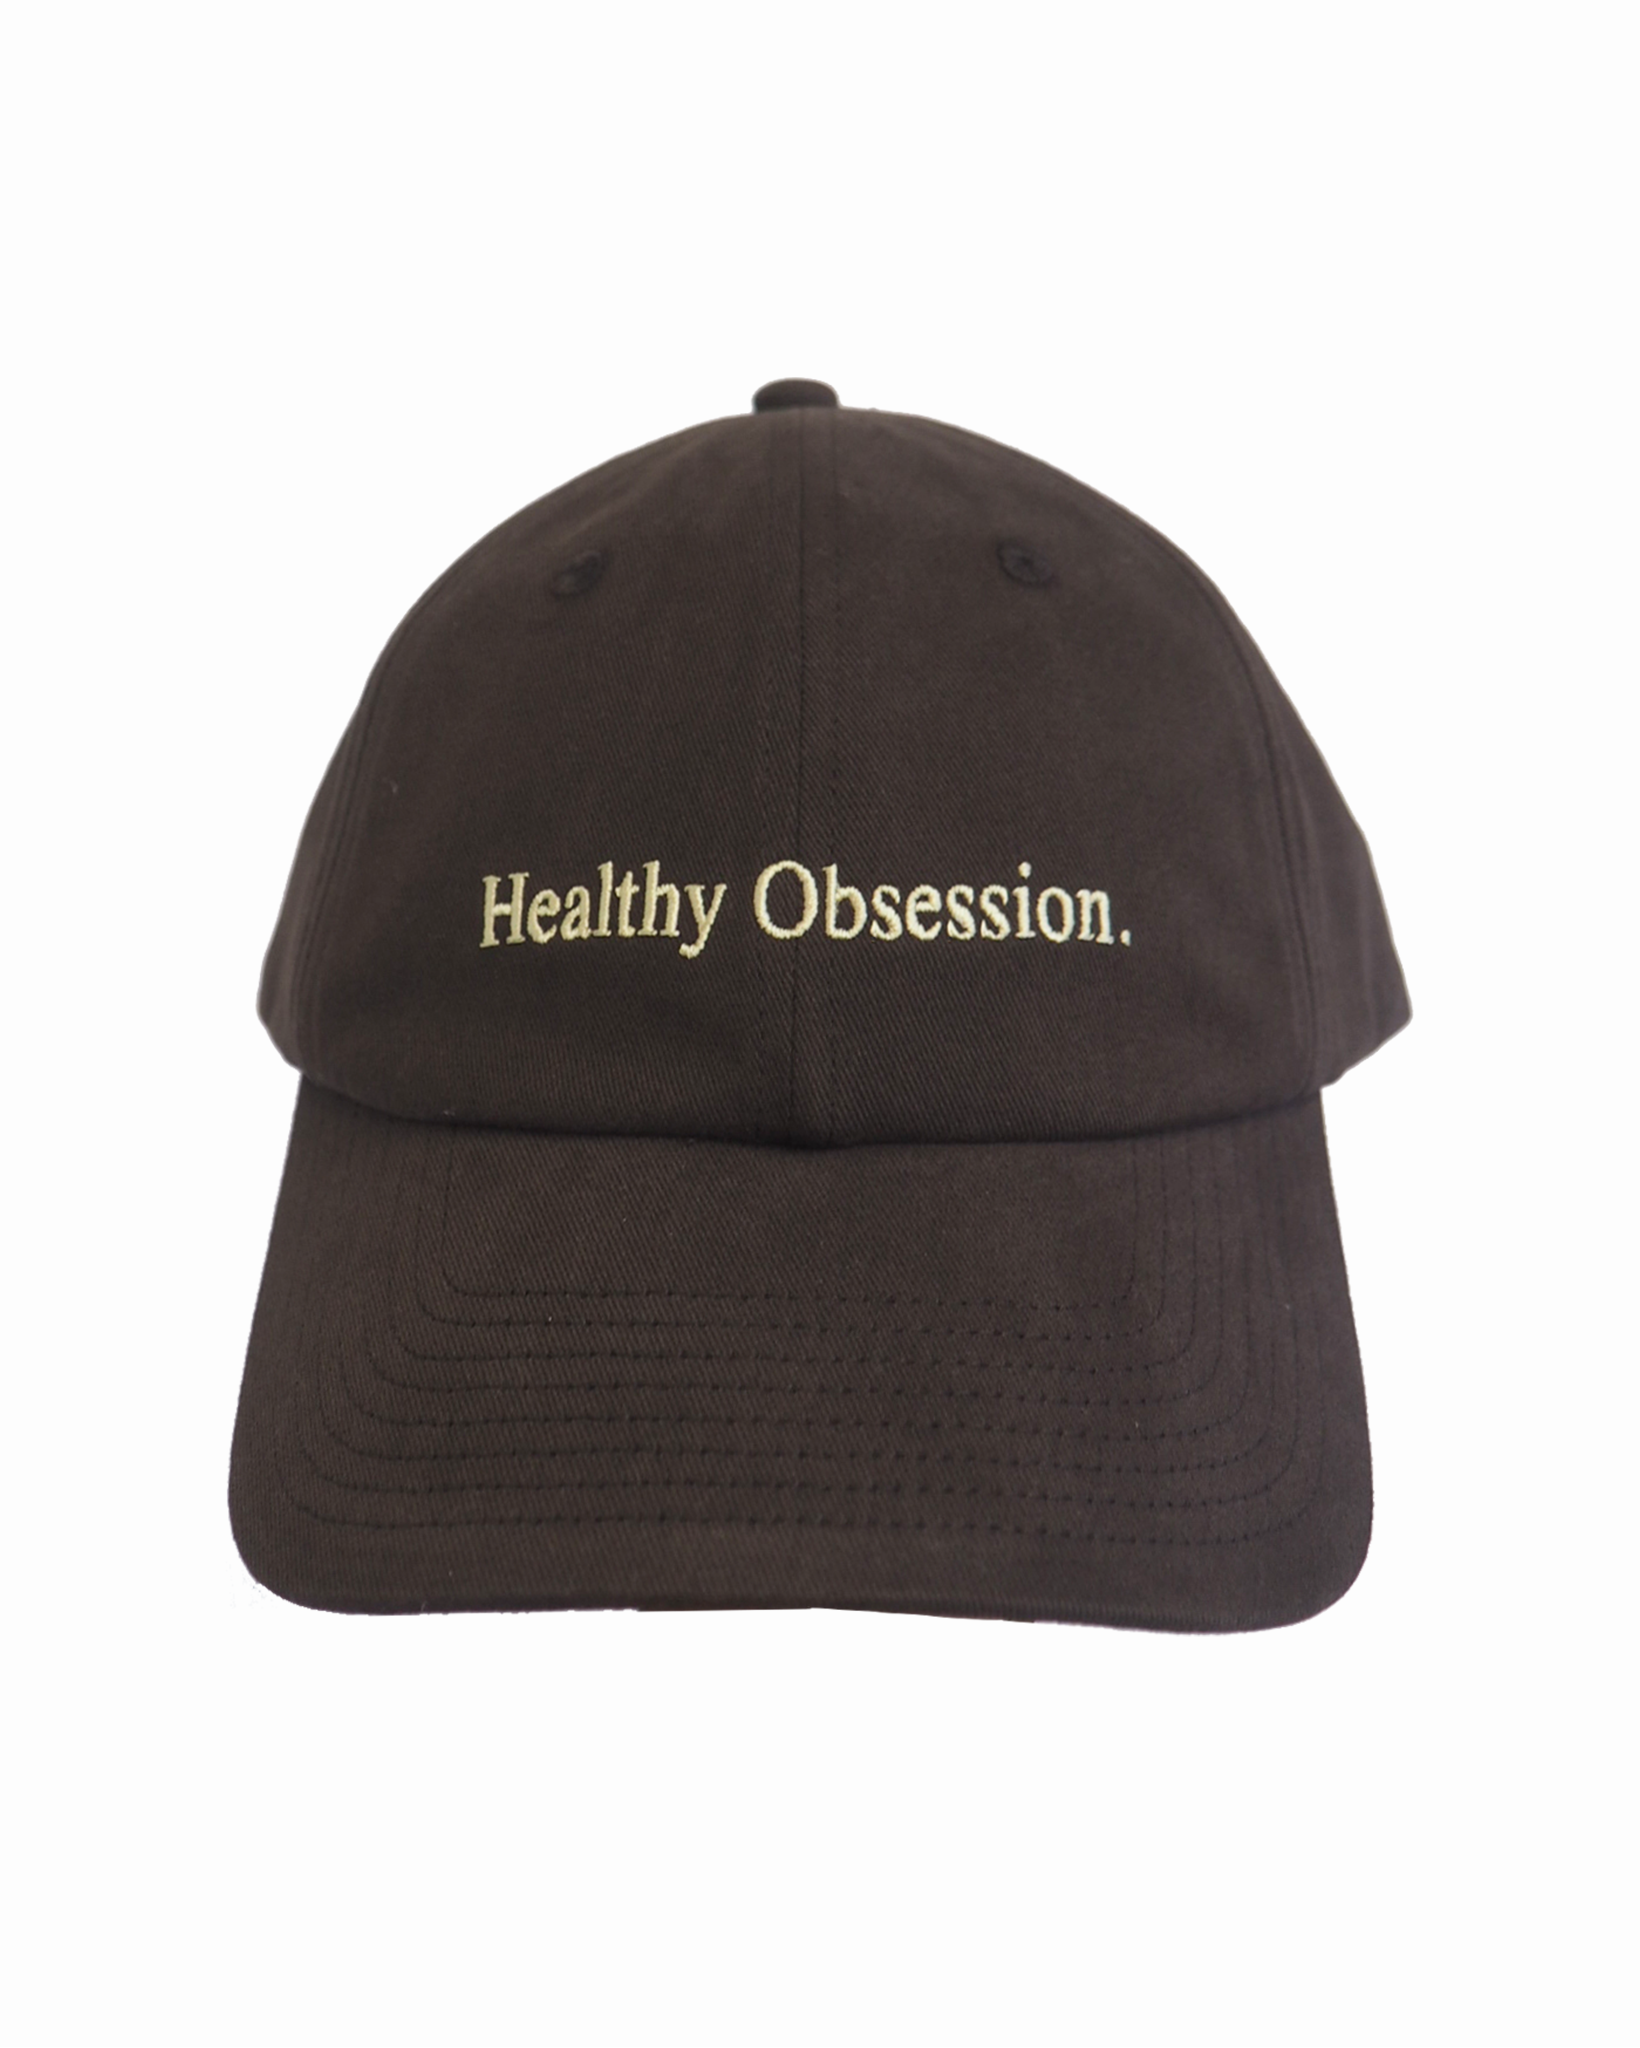 Healthy Obsession Cap Chocolate